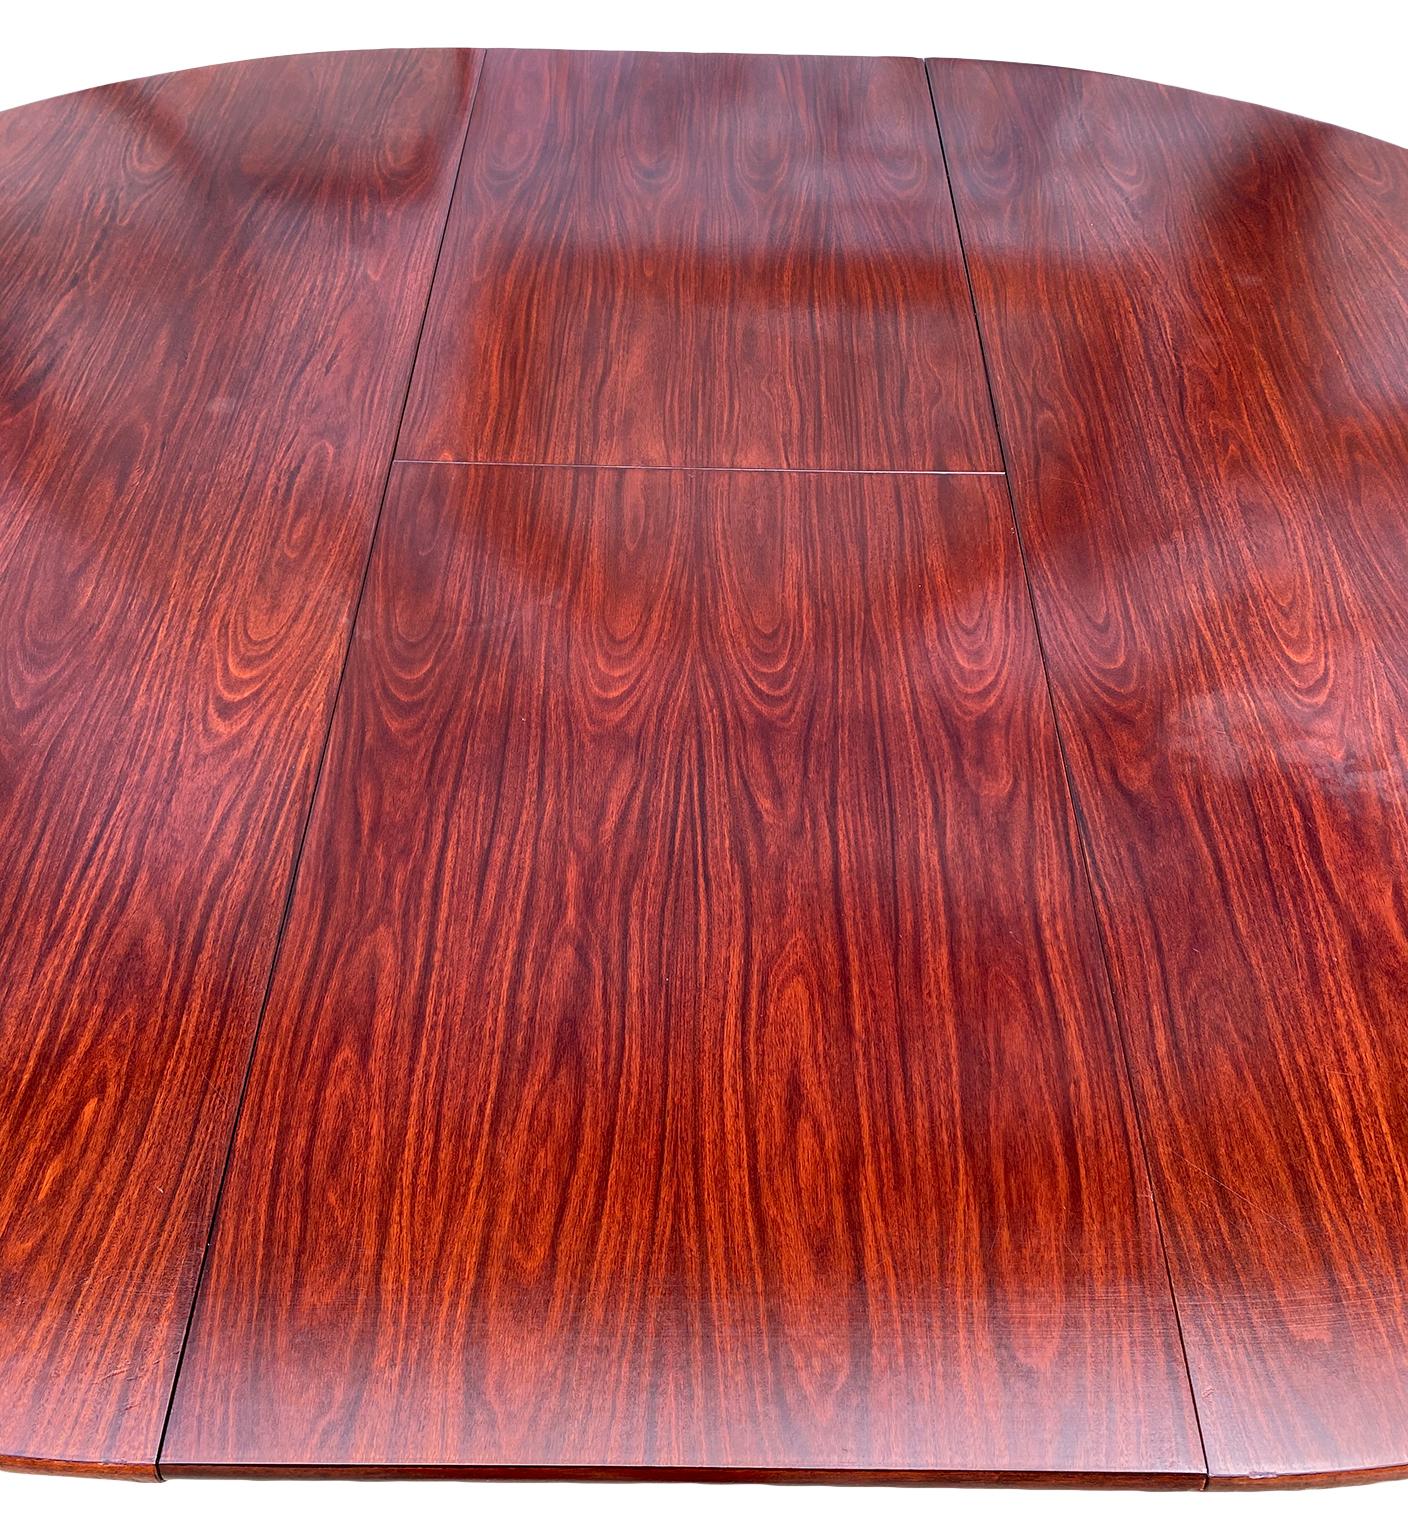 Midcentury Rosewood Expandable Round Dining Table with 1 Nesting Leaf (Mitte des 20. Jahrhunderts)